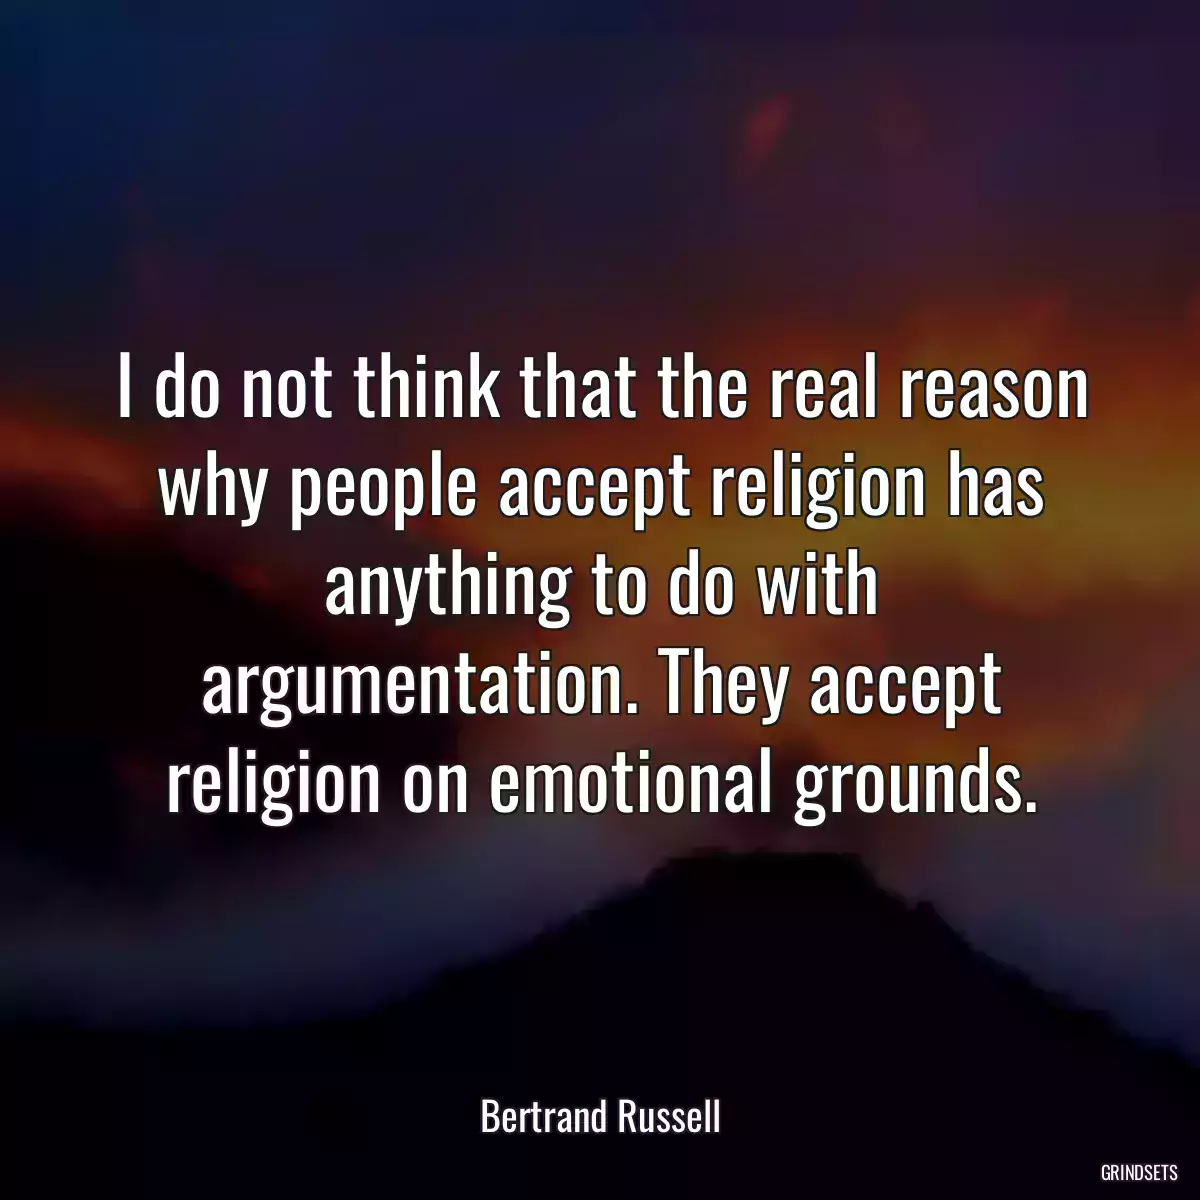 I do not think that the real reason why people accept religion has anything to do with argumentation. They accept religion on emotional grounds.